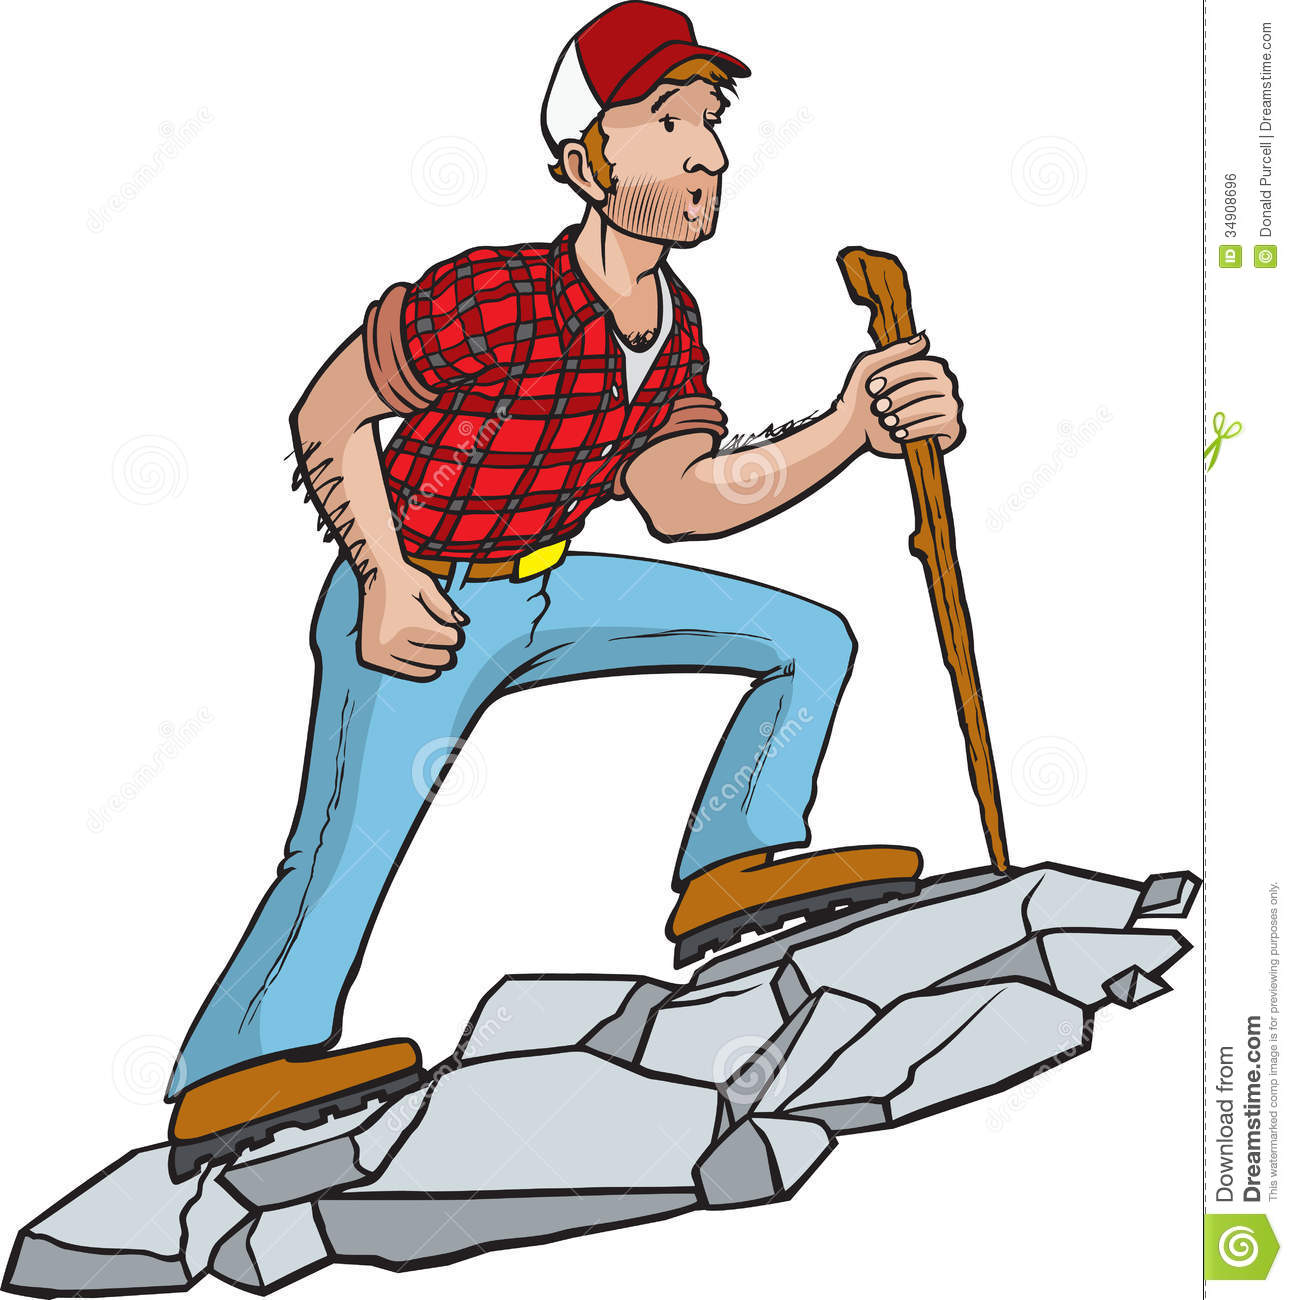 Girl Hiking Clipart Manly Hiker Royalty Free Stock